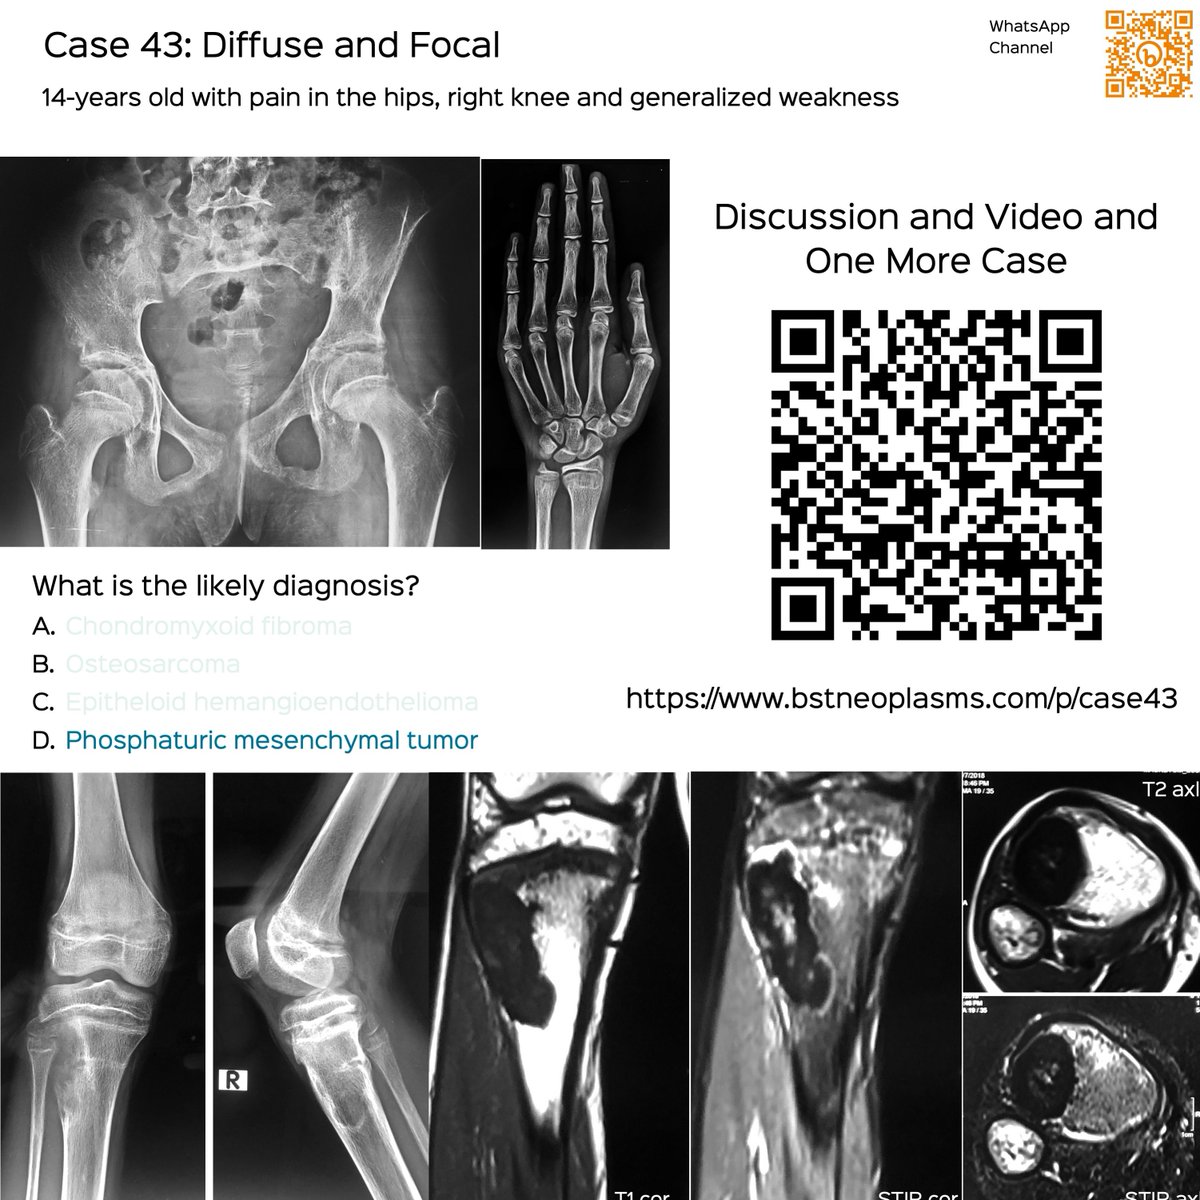 Case 43: Diffuse and Focal

14-yrs old - pain hips, knee & weakness

Answer is PMT

Discussion, video and another case
bstneoplasms.com/p/case43/

#bstneoplasms #radres #bonetumor #PMT #TIO #osteomalacia #rickets